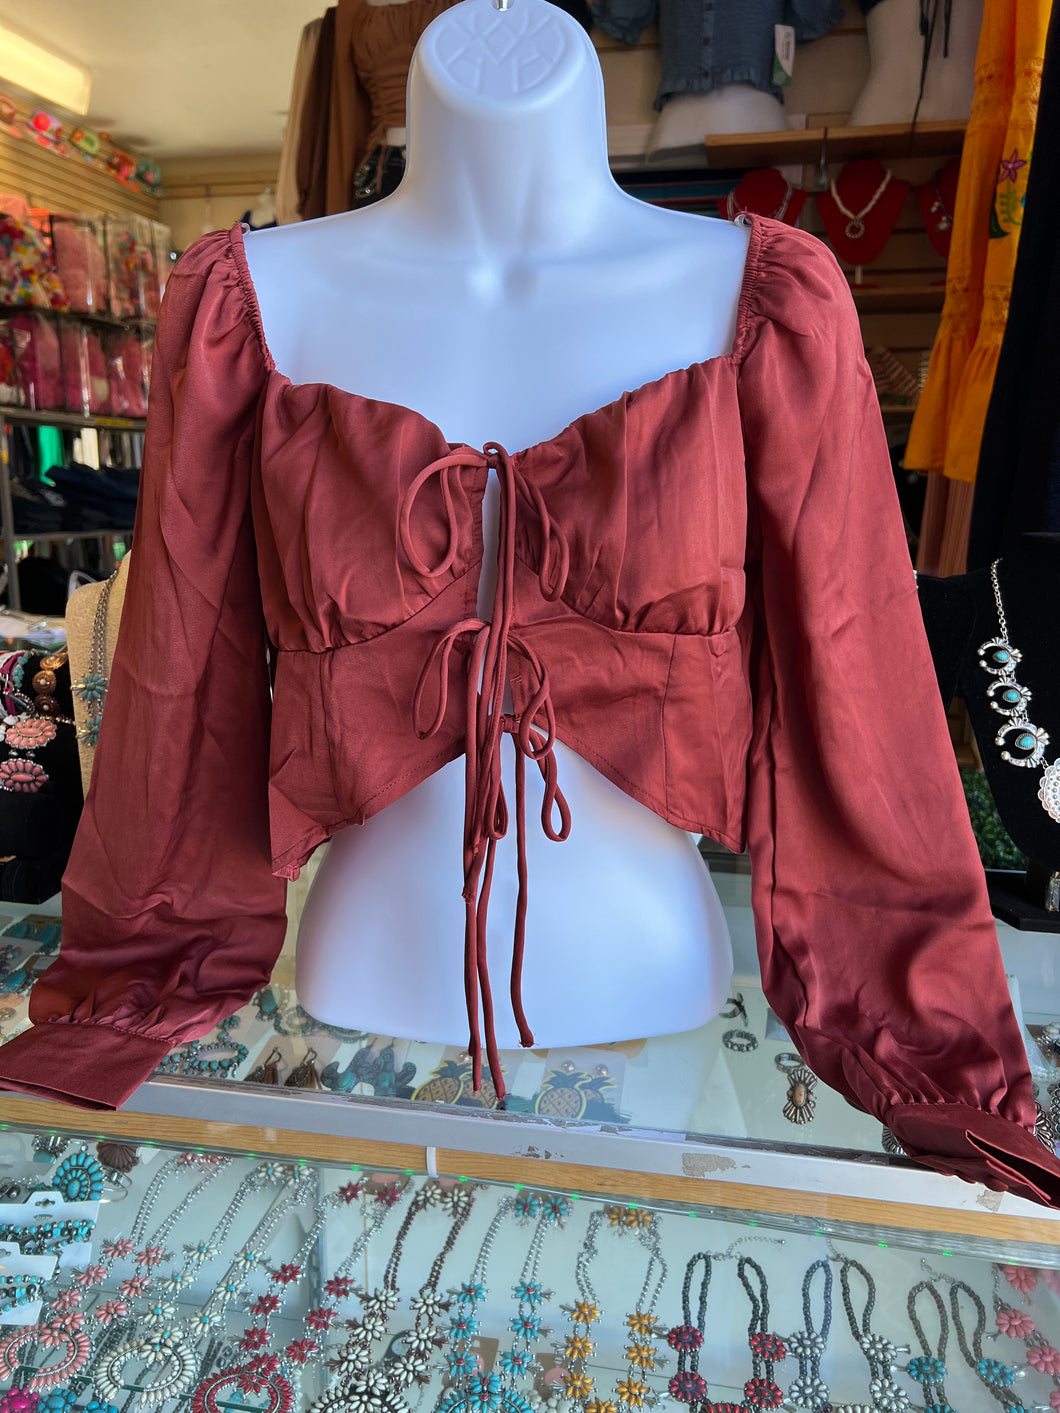 Burgundy Top size medium and large